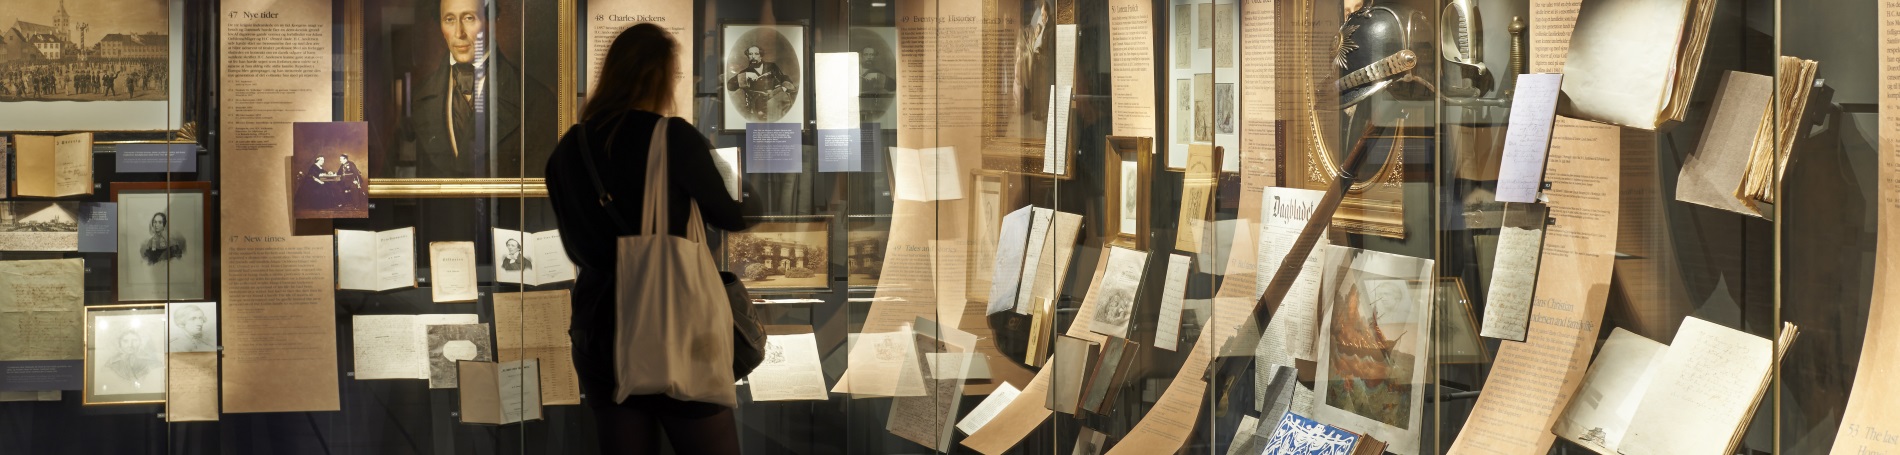 lady looking at a museum display of old artifacts